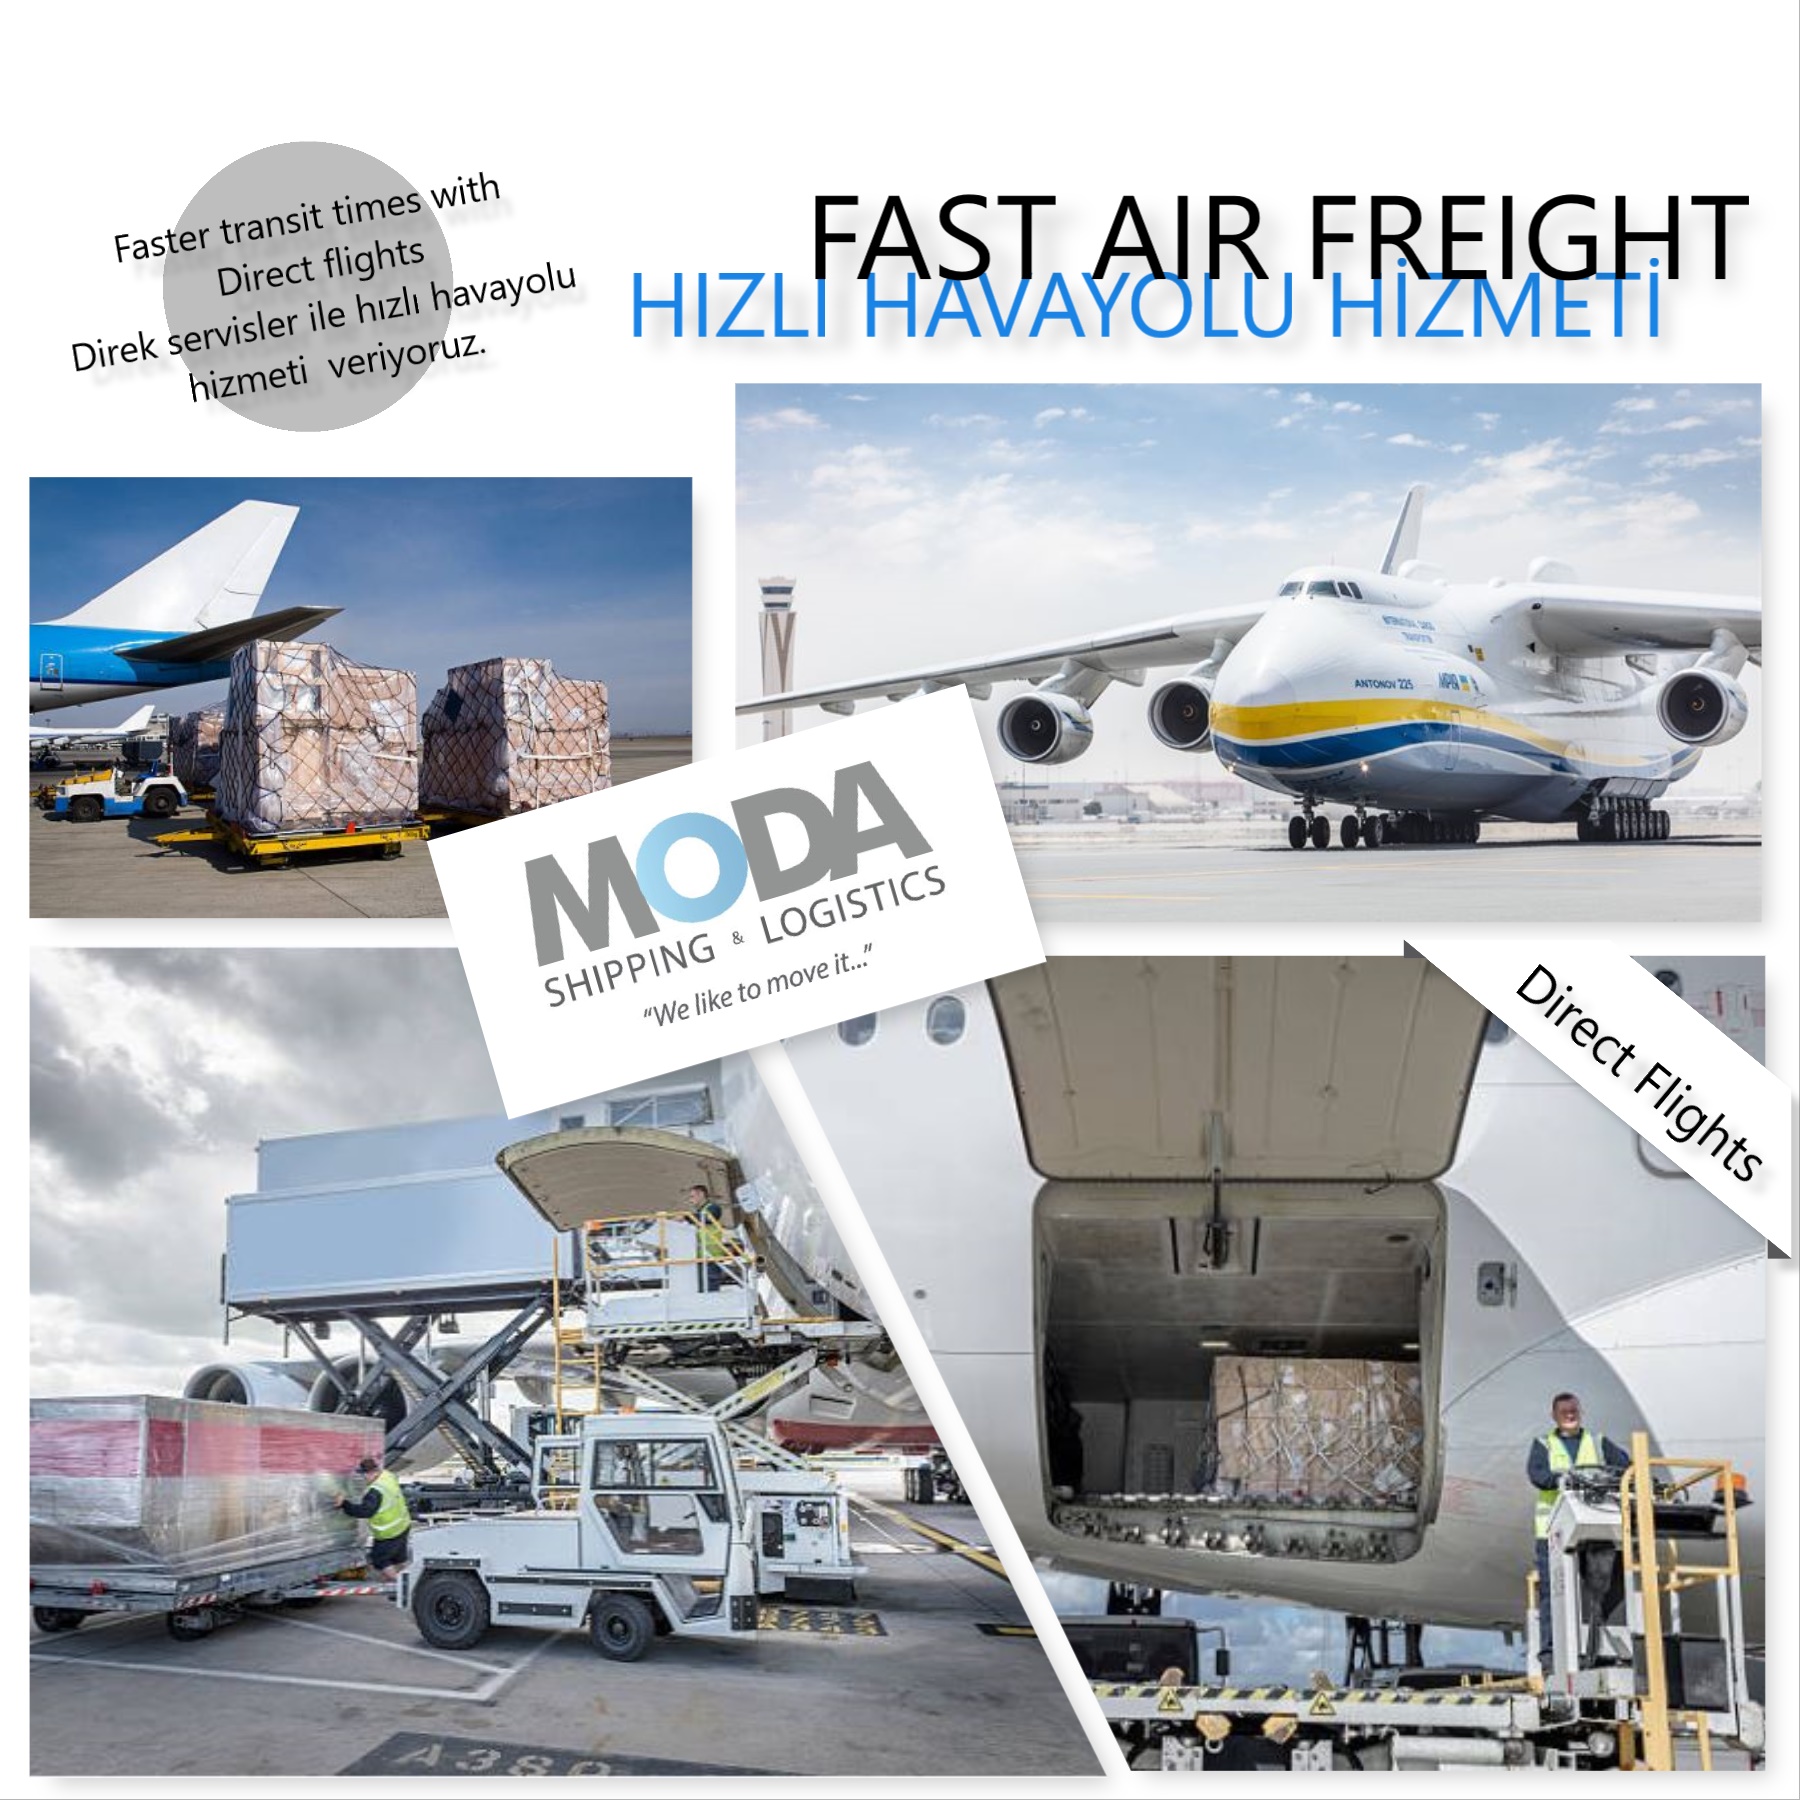 FAST AIRFREIGHT SERVICE